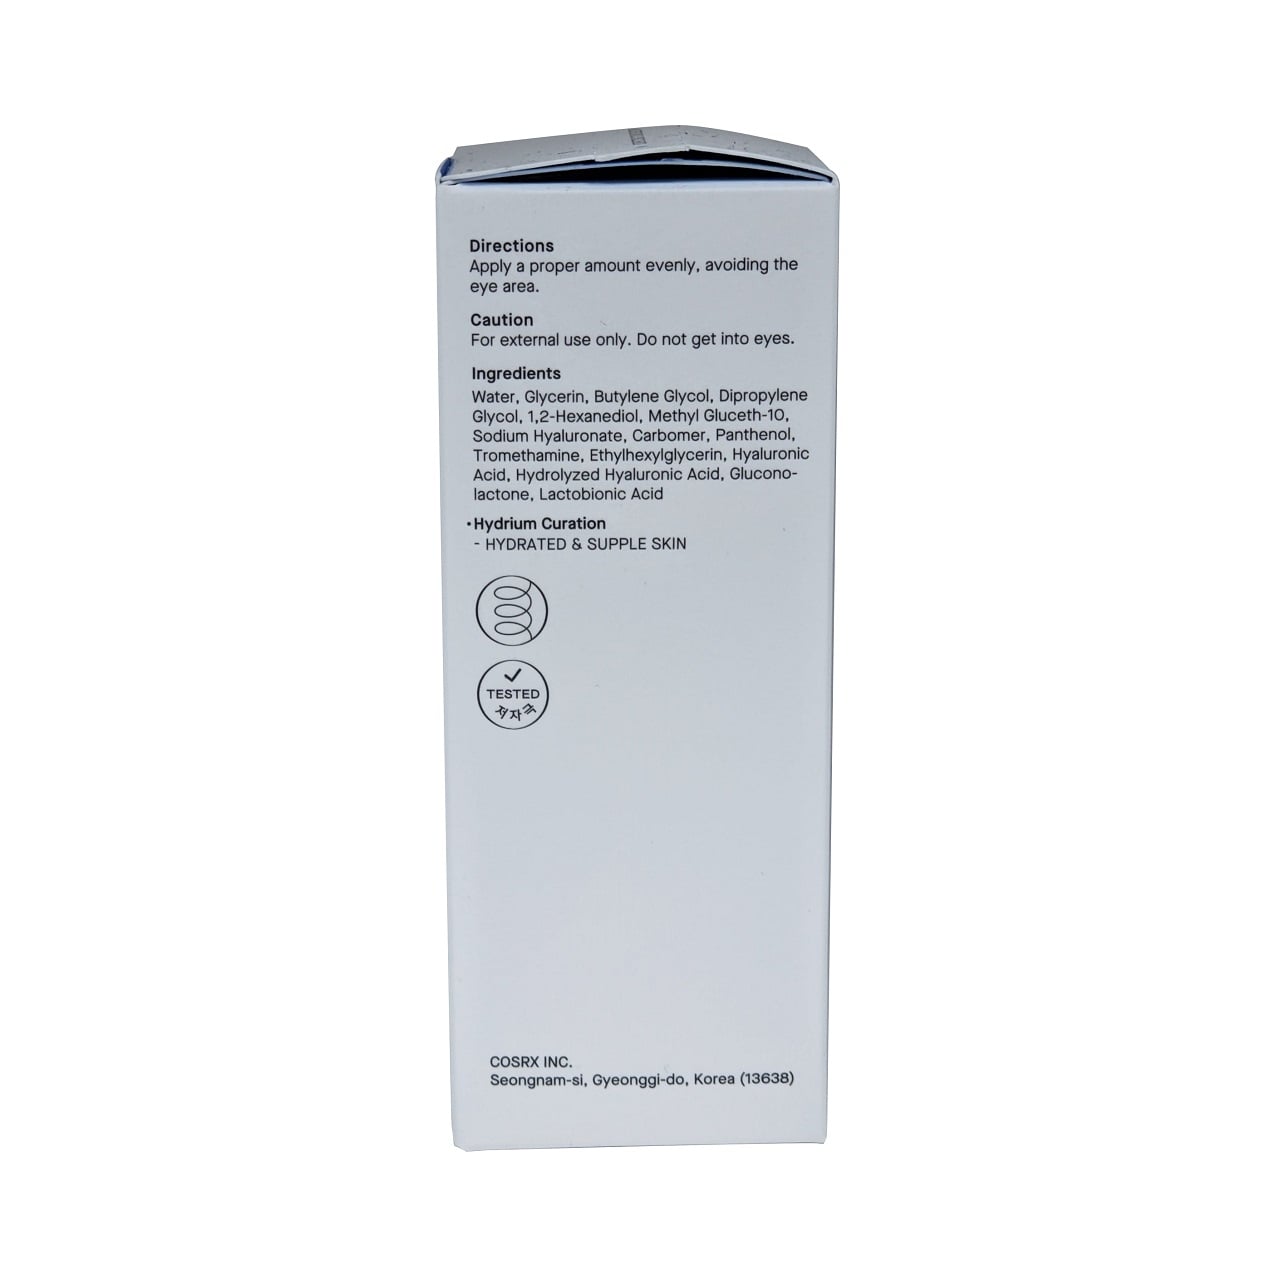 Directions, caution, and ingredients for COSRX Hydrium Triple Hyaluronic Moisture Ampoule